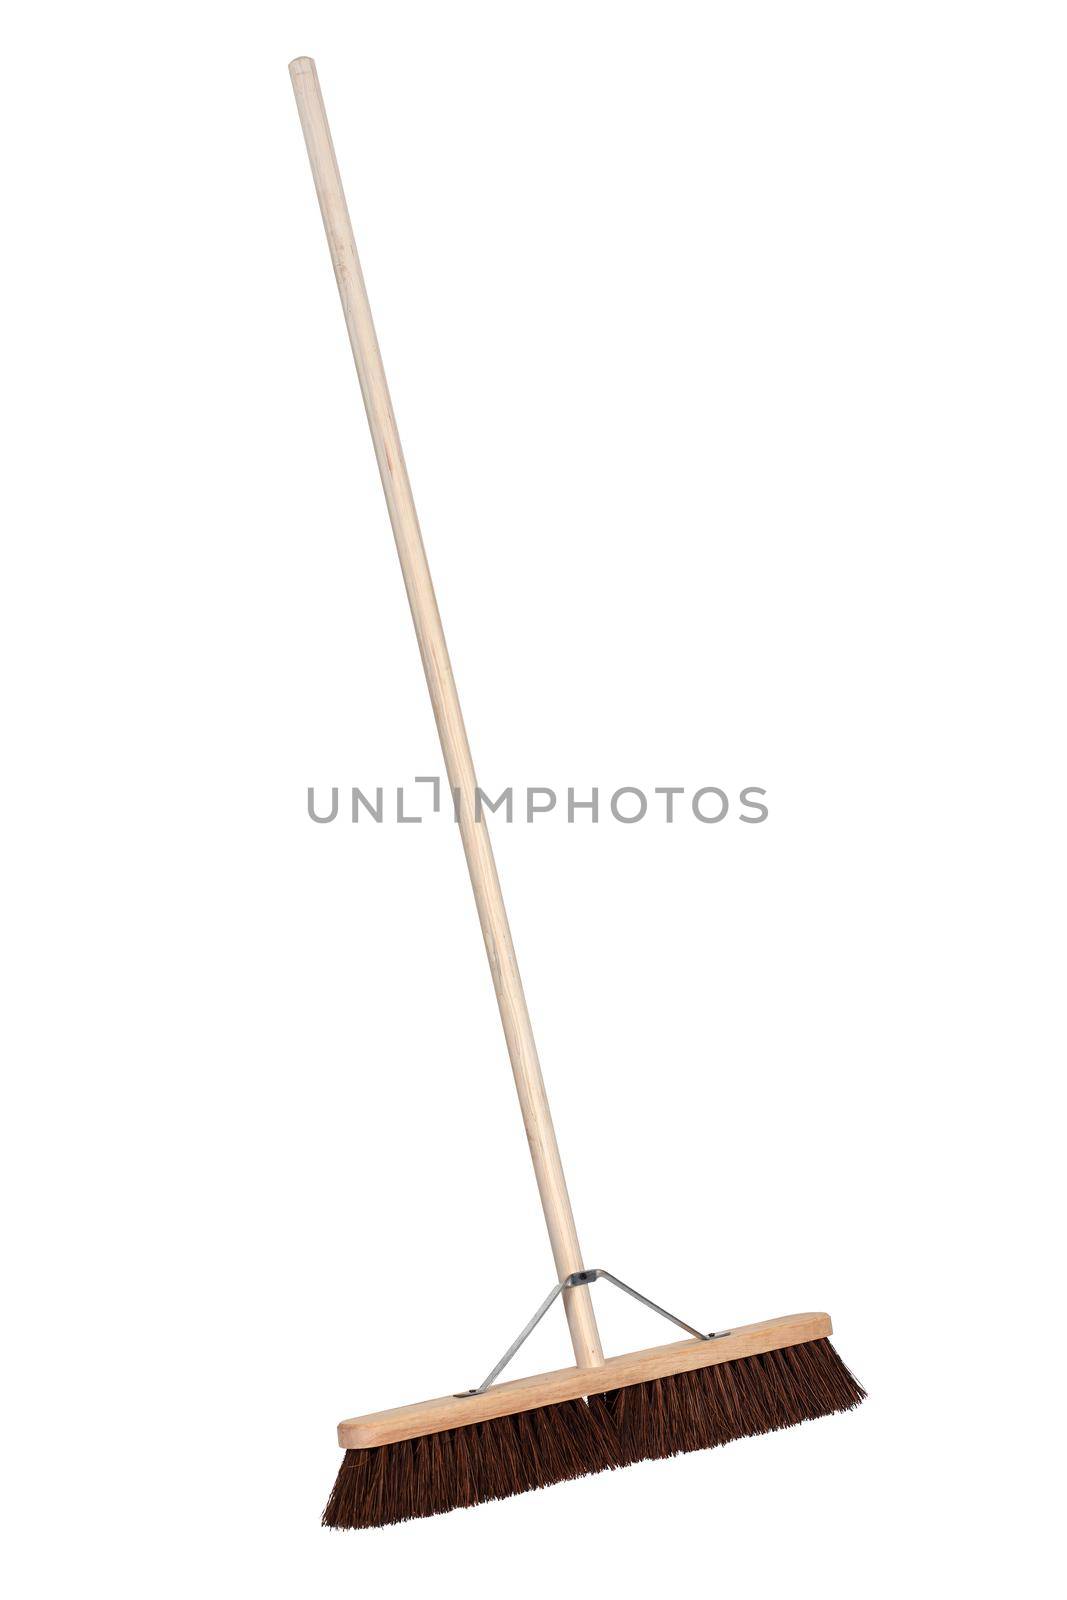 A wood yard broom inclined left on white background